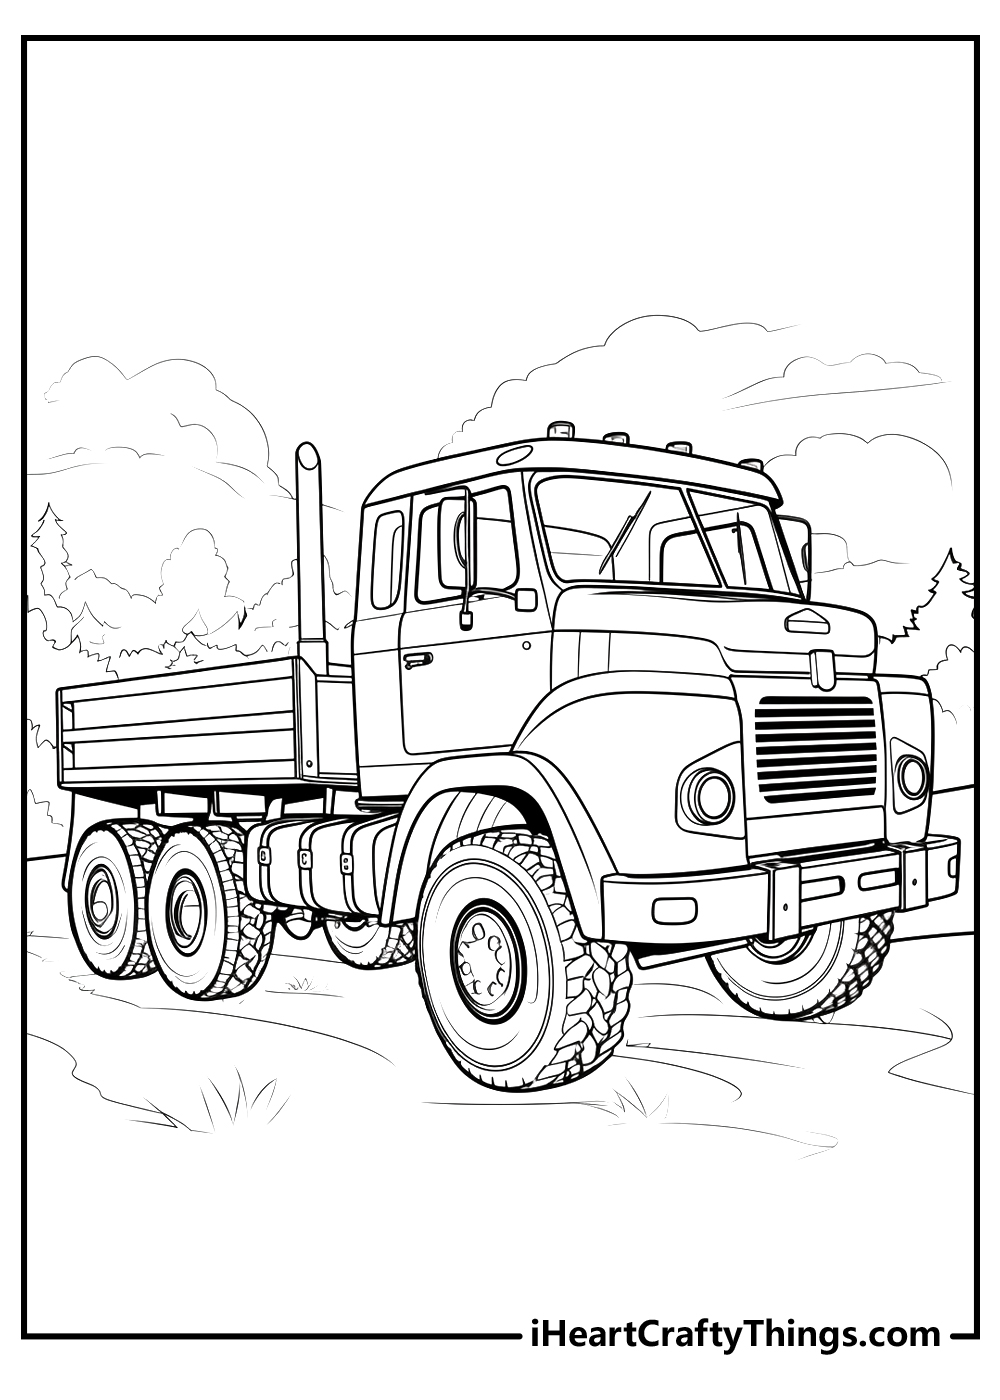 Truck Coloring Pages Free Download